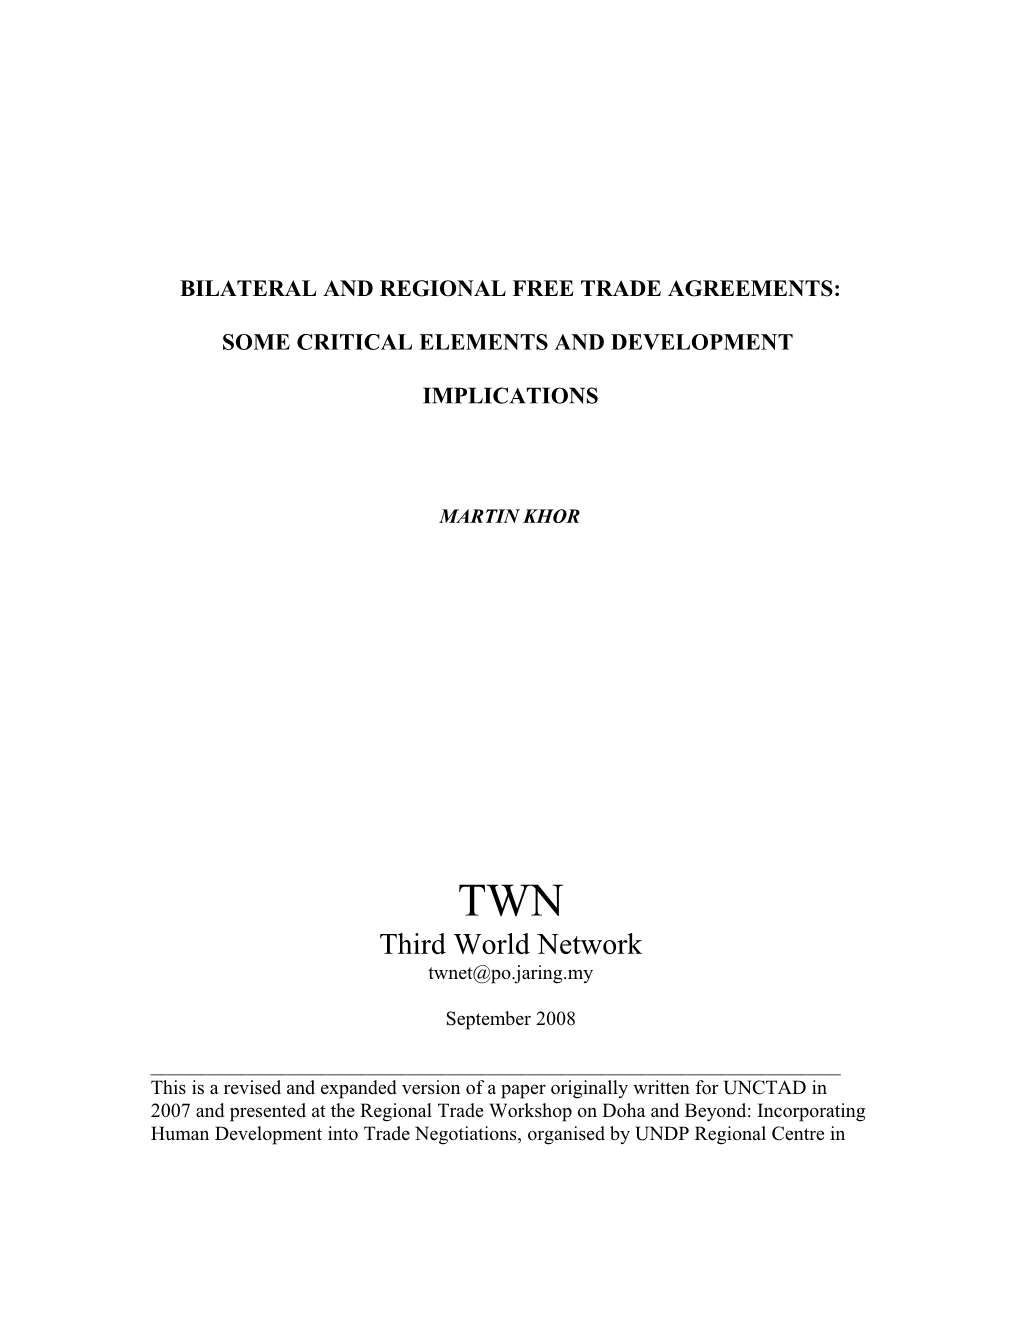 Bilateral/Regional Free Trade Agreements: an Outline of Elements, Nature and Development